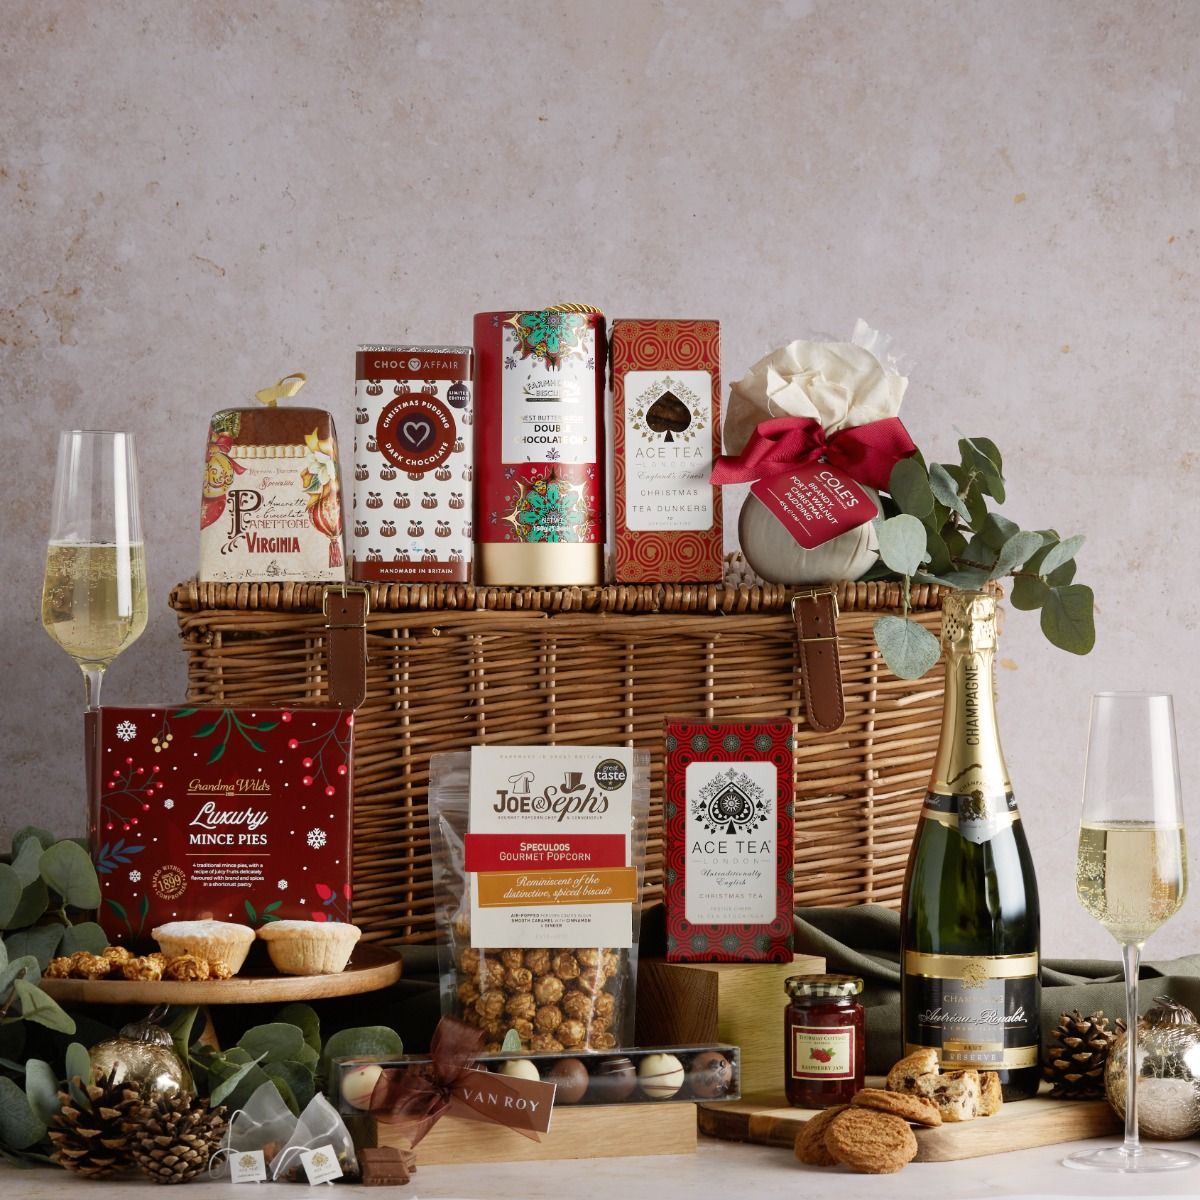 How To Make A Christmas Hamper - ILoveCooking